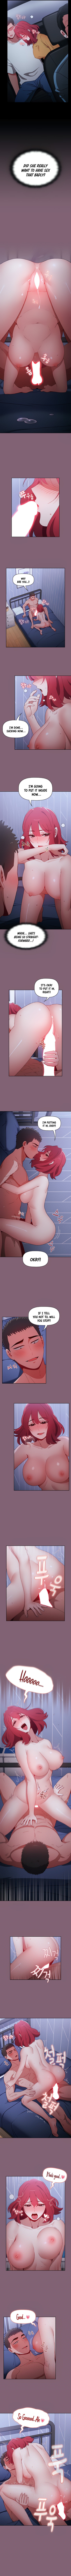 Dorm Room Sisters - Chapter 29 Page 3